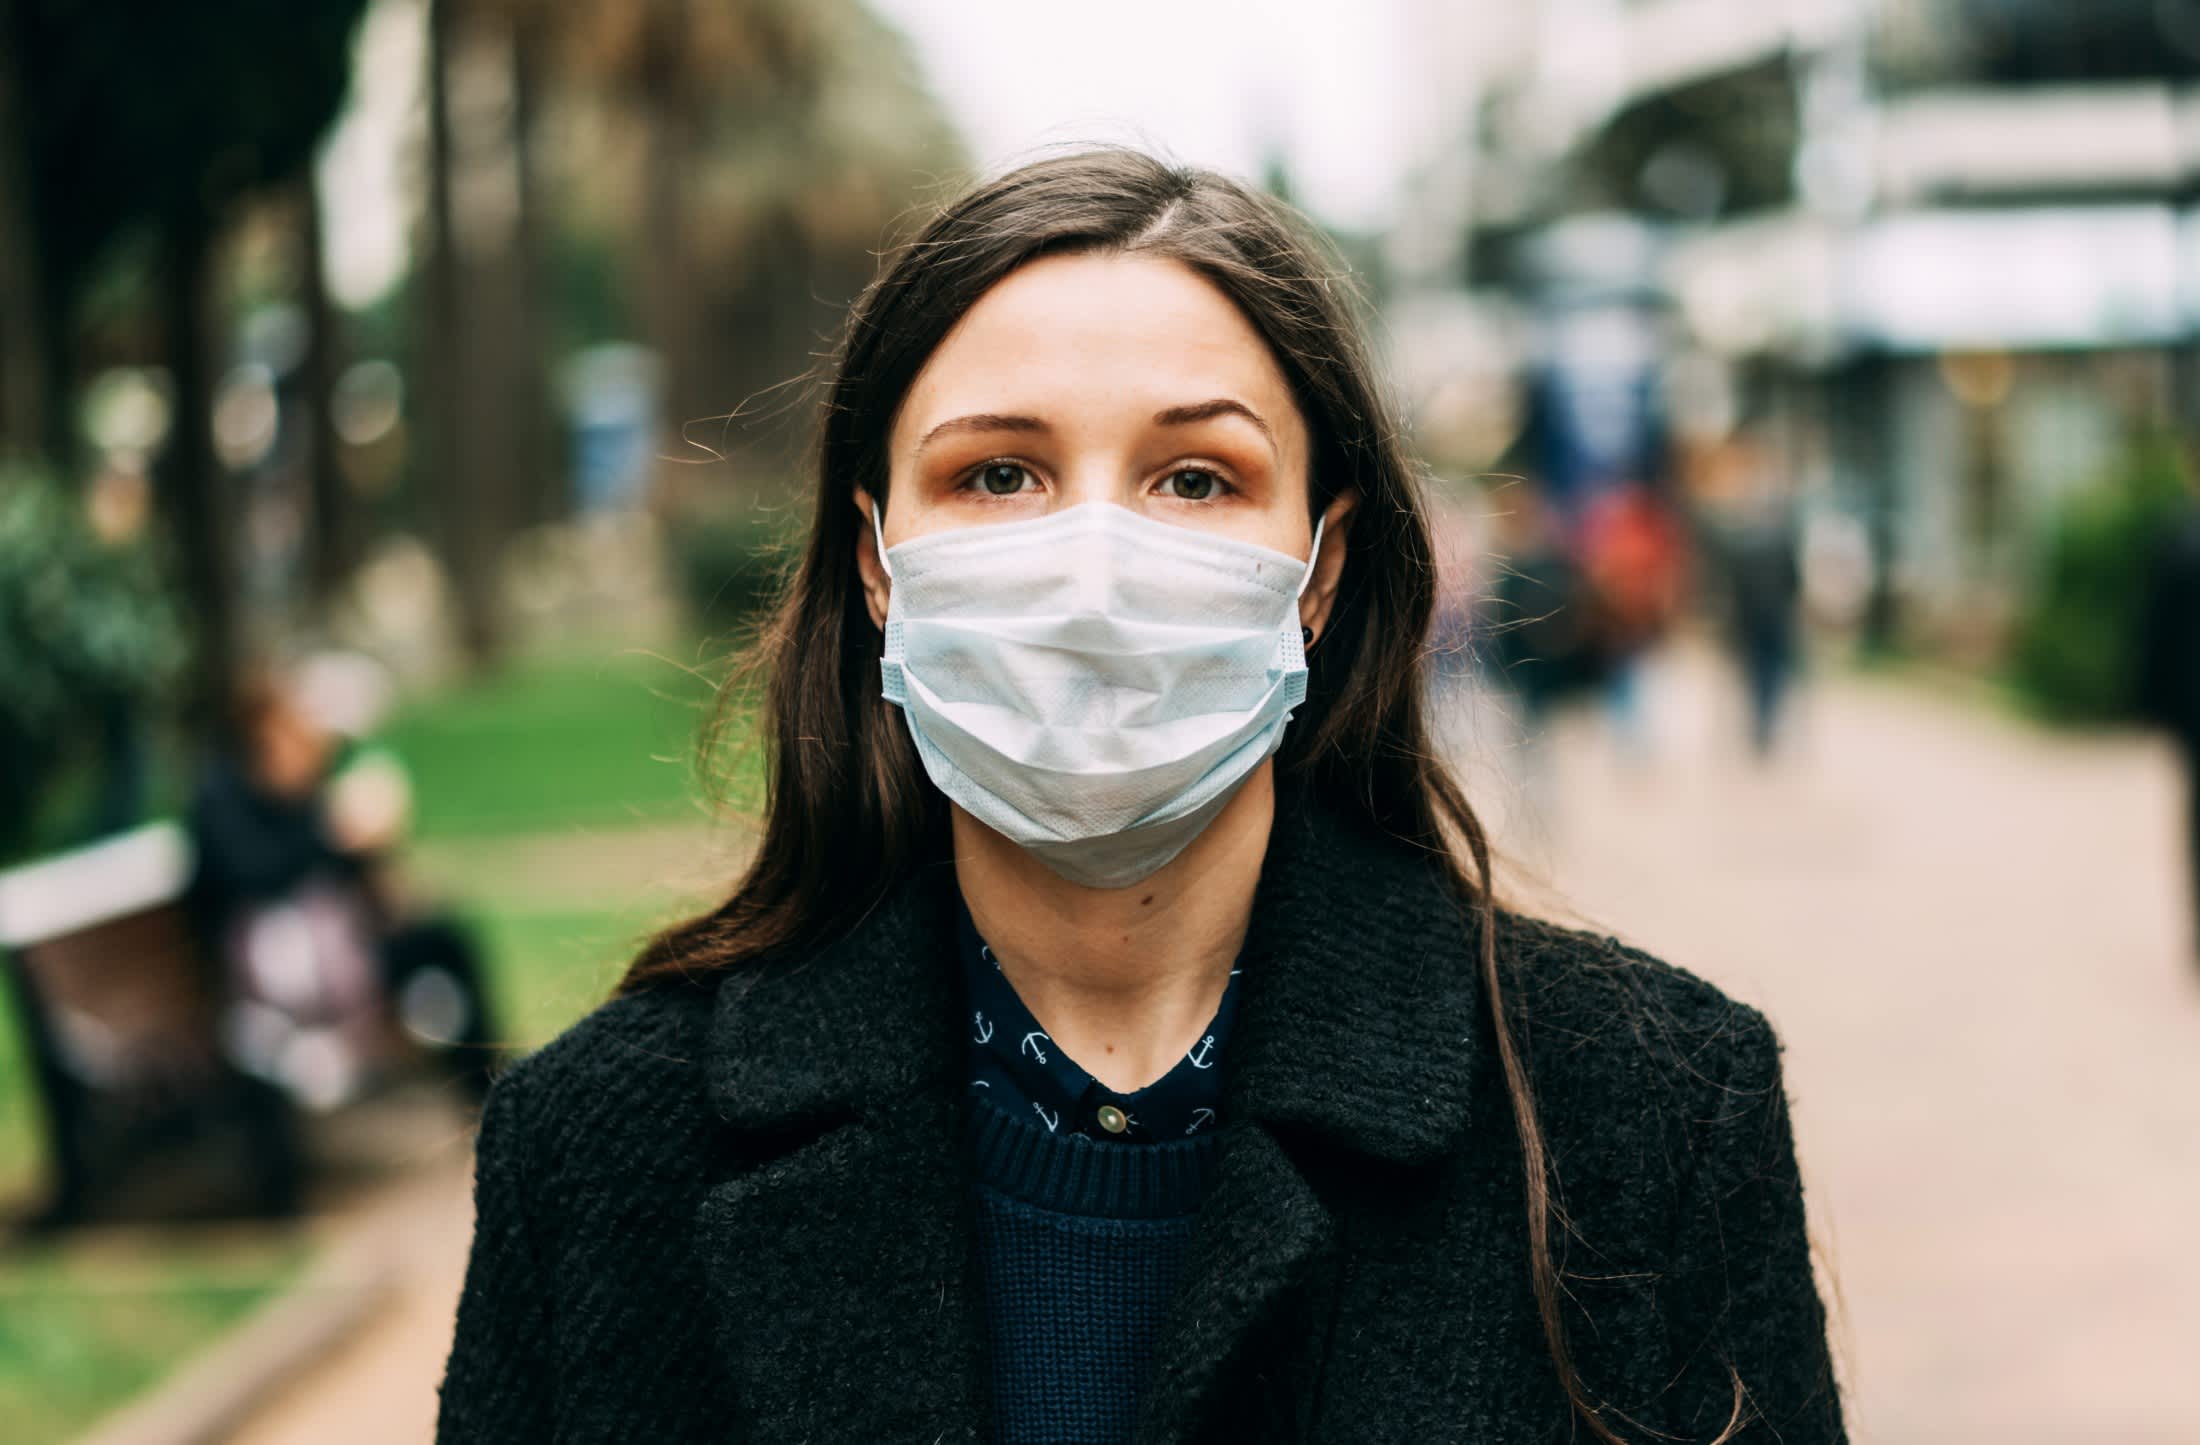 Should you wear a face mask to prevent COVID-19? Doctors weigh in